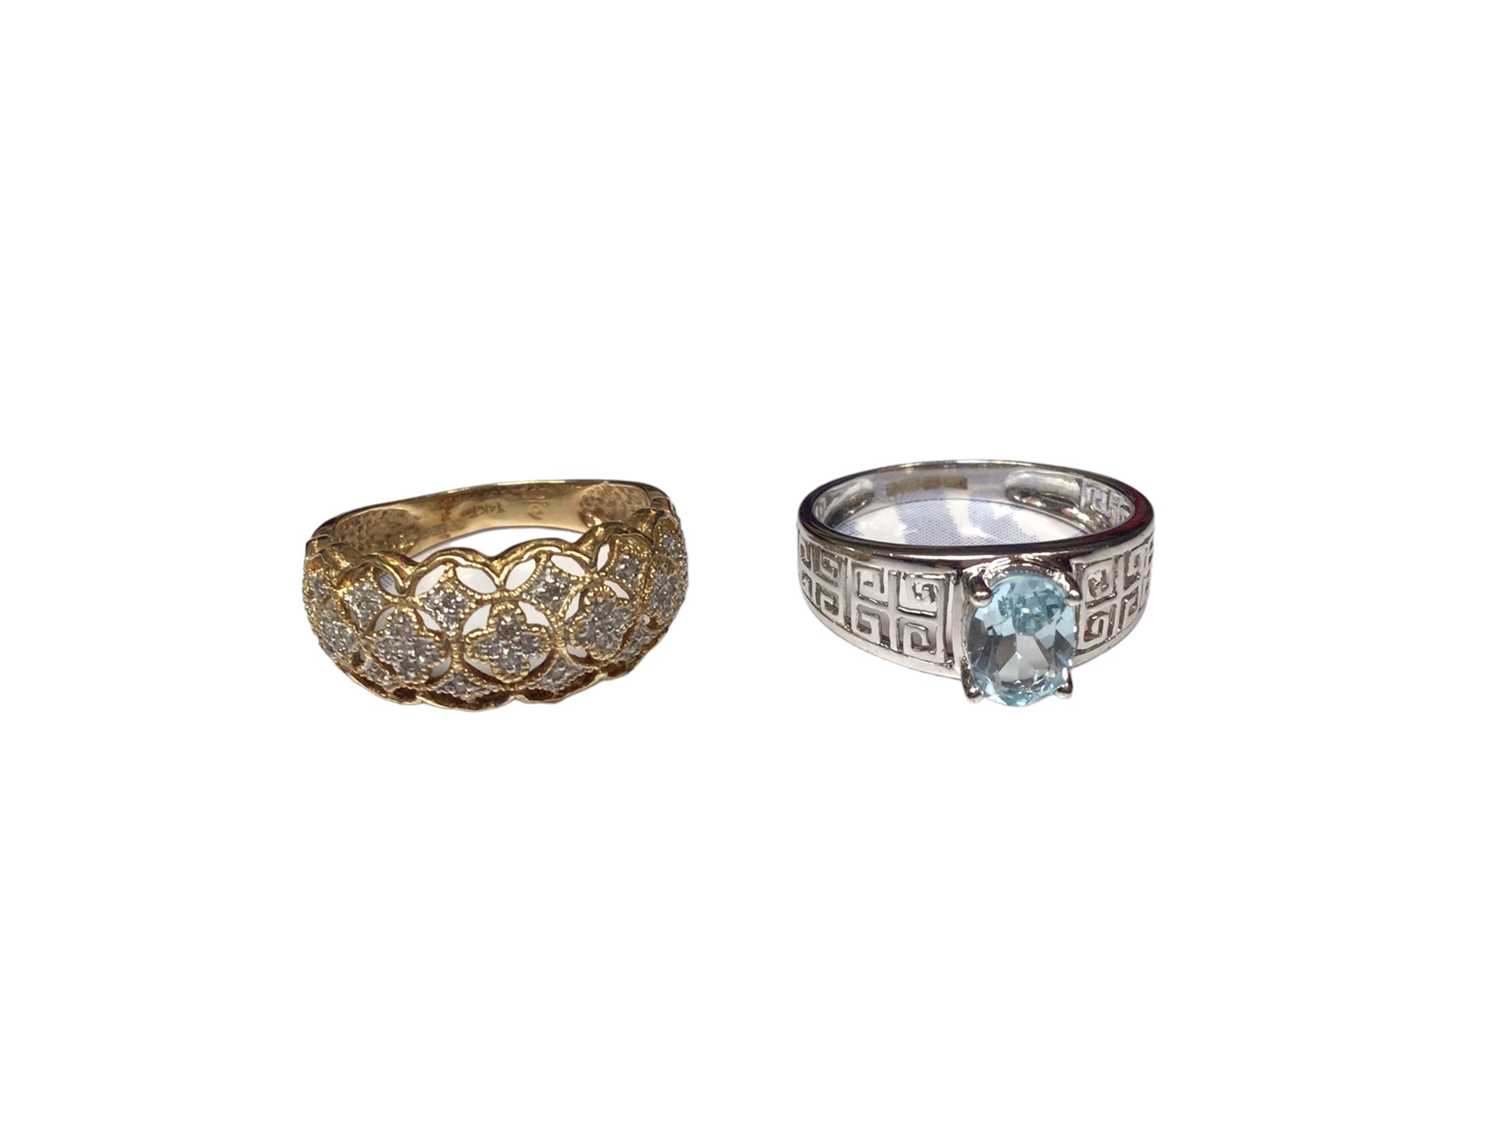 Lot 178 - 14ct gold dress ring with a diamond set pierced design and a 9ct white gold blue stone dress ring with pierced Greek key design